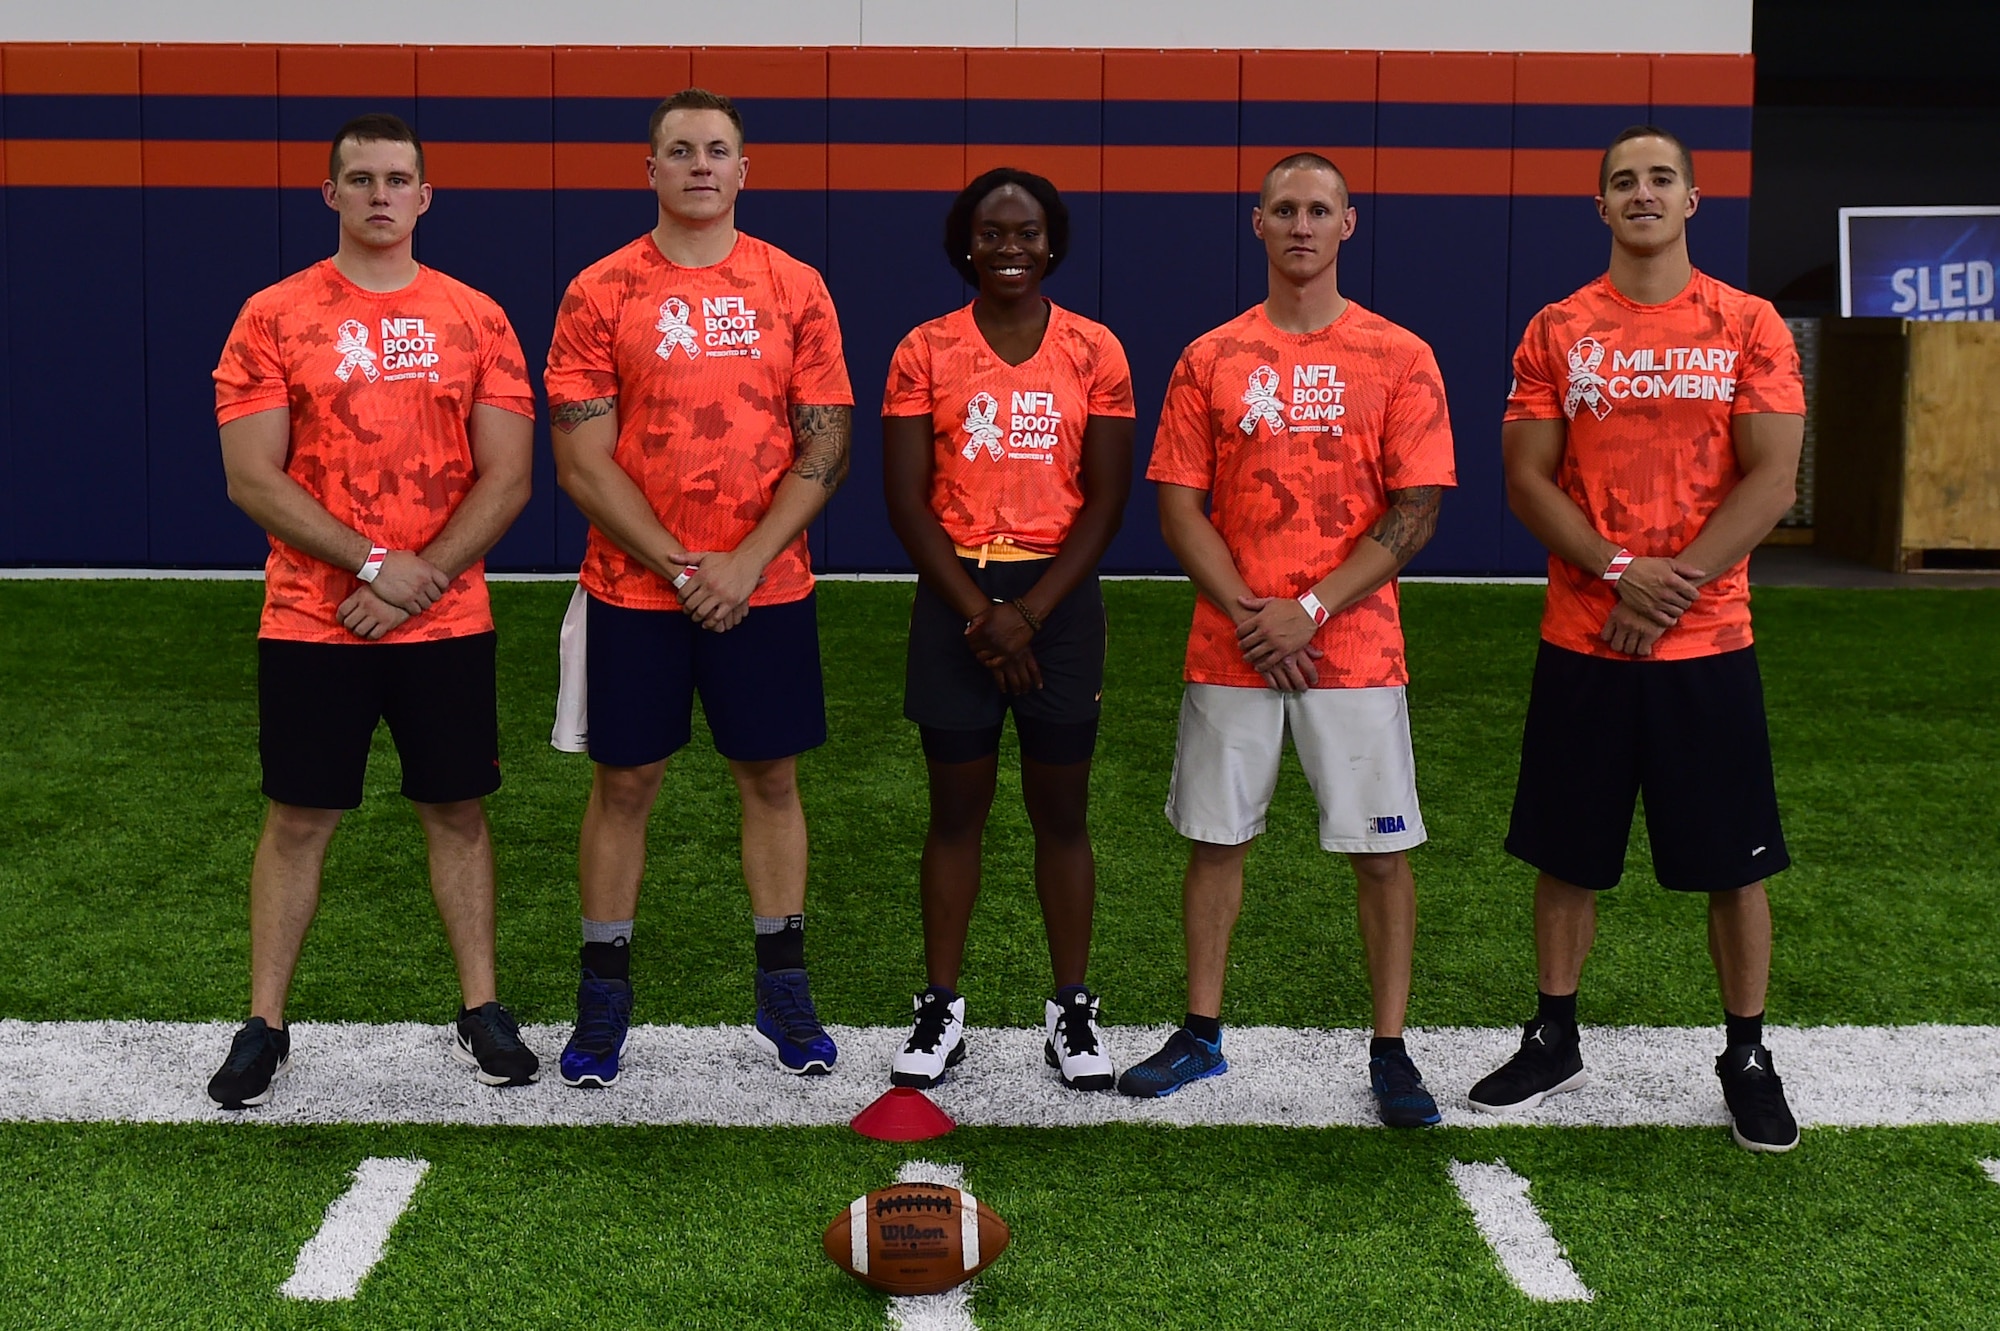 Team Buckley stands together during a military training camp at the Denver Broncos’ University of Colorado Health Training Center Fieldhouse in Englewood, Colo., August 25, 2016. The five-person team participated in five head-to-head skill challenges and won the overall competition. (U.S. Air Force photo by Airman 1st Class Gabrielle Spradling/Released)